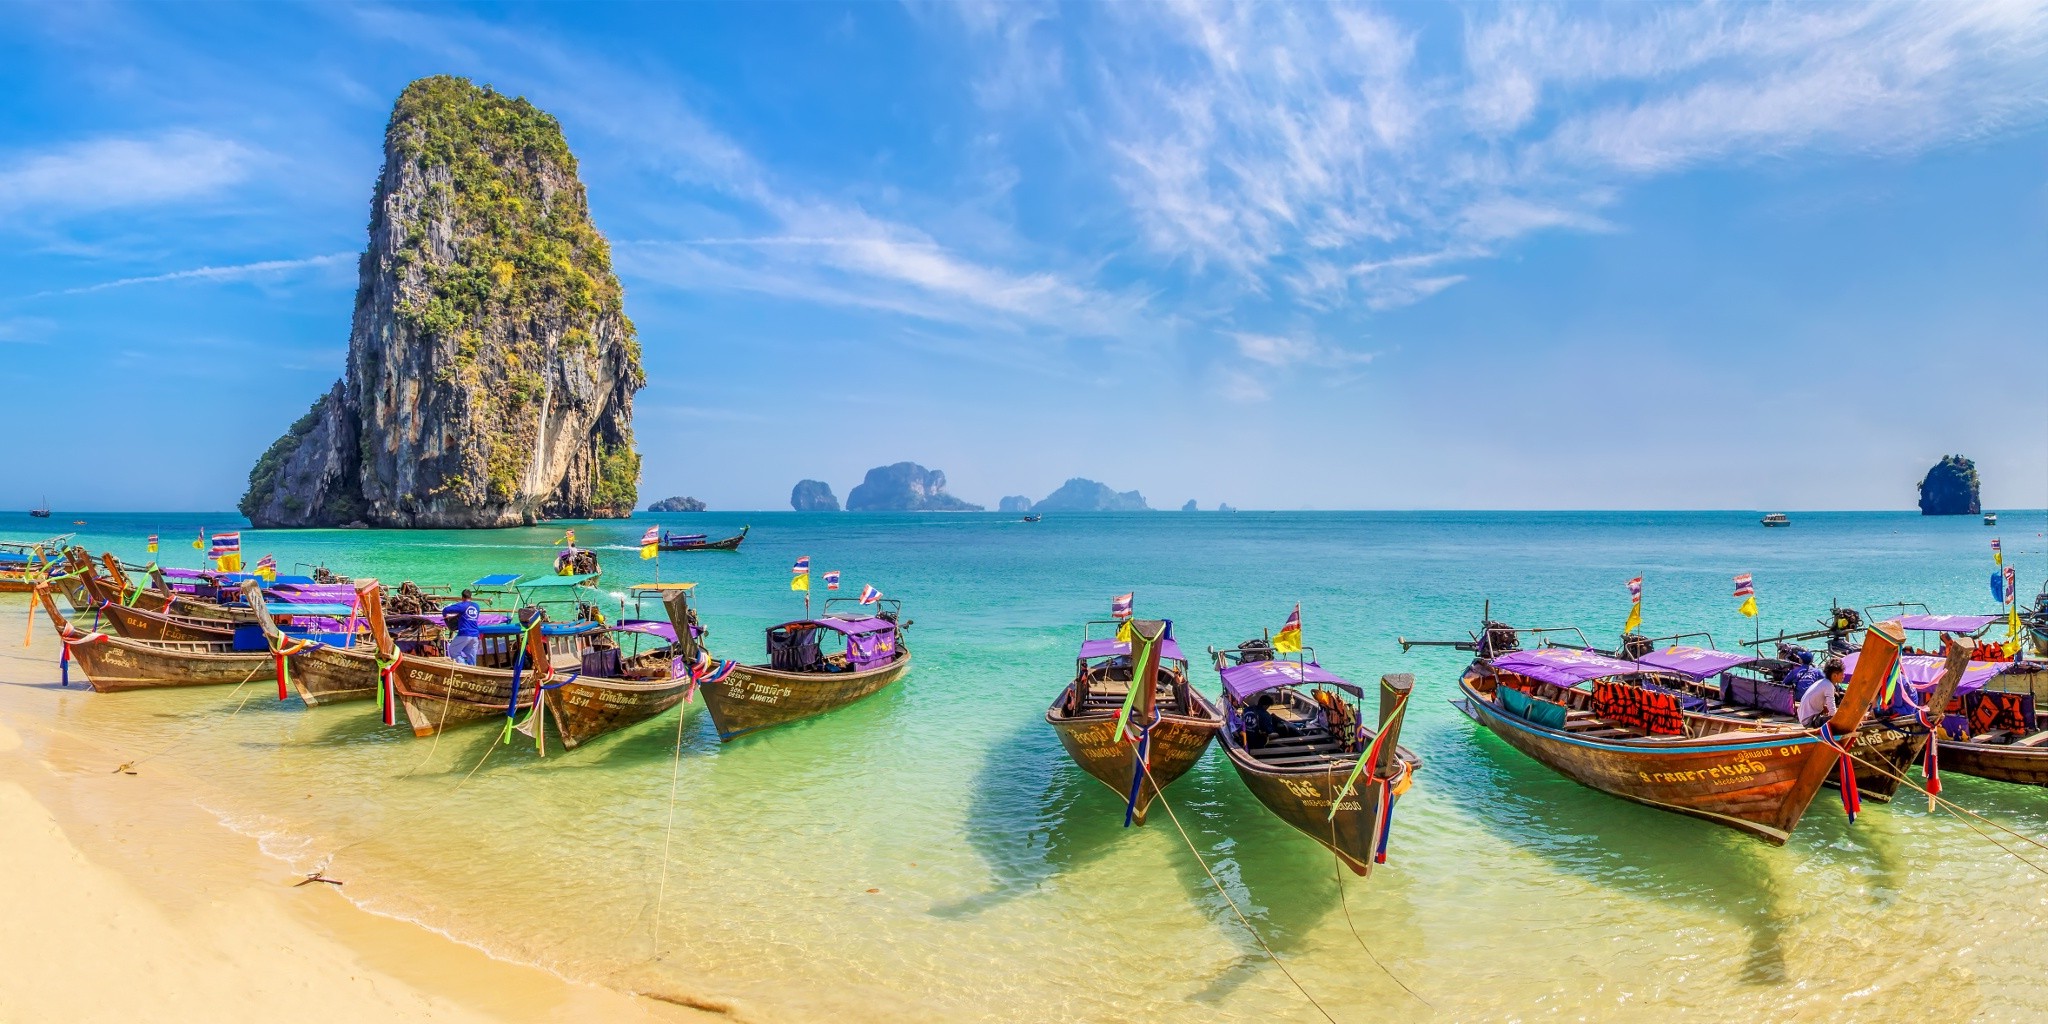 Beach sand boat limestone island sea turquoise water tropical vacations summer nature landscape thailand wallpapers hd desktop and mobile backgrounds